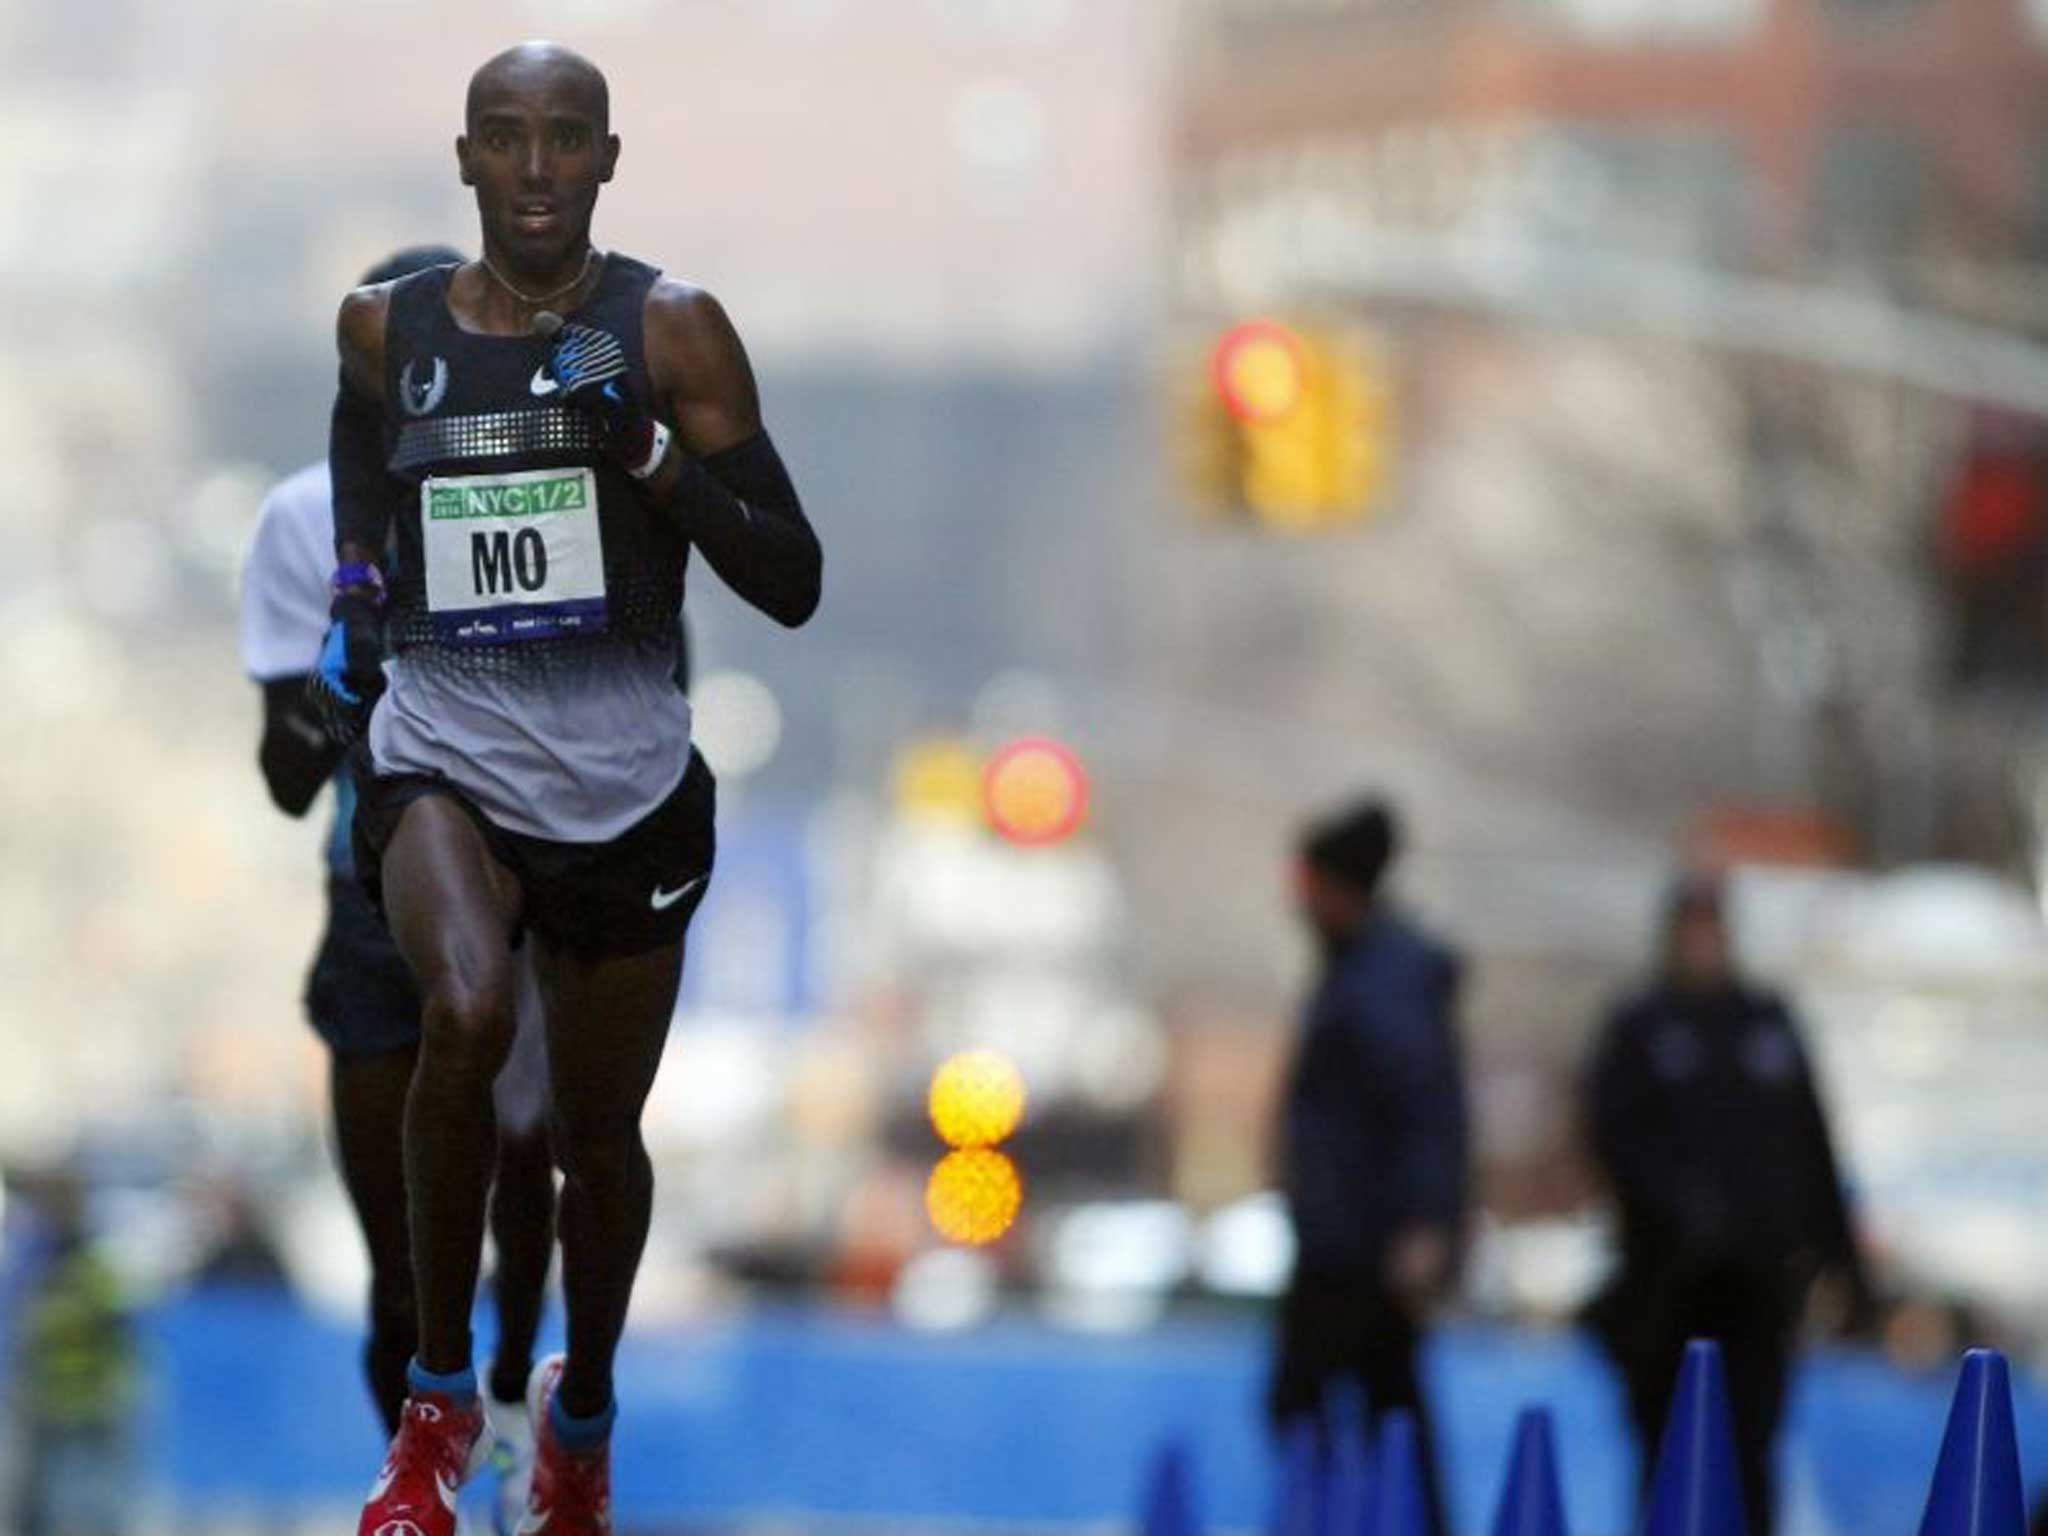 Run, Mo, run: Mo Farah is attempting the full London Marathon for the first time this year